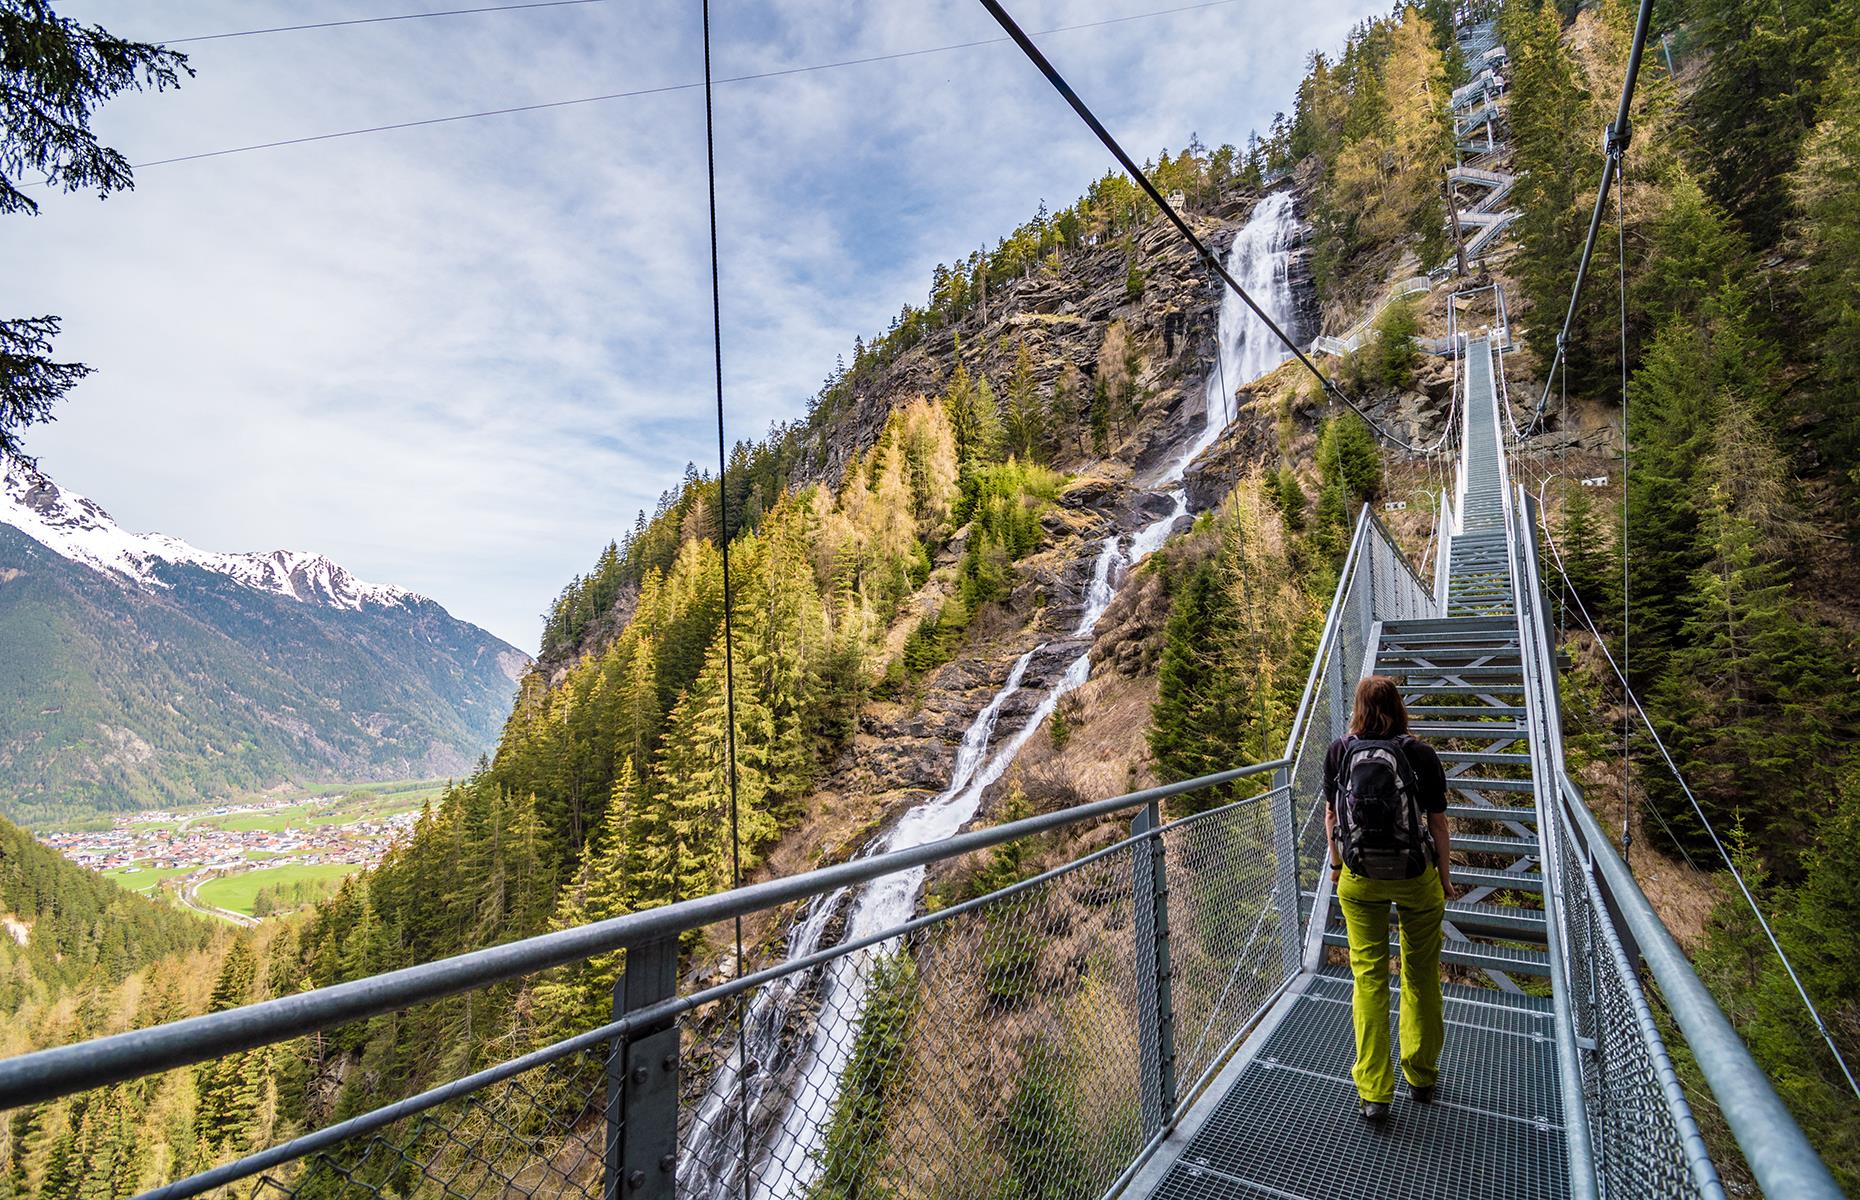 <p>Austria’s <a href="https://www.tyrol.com/things-to-do/attractions/all-attractions/a-stuibenfall-oetztal">Stuibenfall Waterfall</a> in the Tyrol region looks like postcard material: the foaming water cascades 522 feet (159m) over cliffs, weather-beaten rocks and mossy boulders, which you can marvel at from a series of viewing platforms. If you’re travelling with slightly older children, you can cross through the mist on a 262-foot (80m) rope bridge. There are also pushchair-friendly routes, so hikers of all ages can reach the falls.</p>  <p><a href="https://www.loveexploring.com/galleries/151611/surprising-sights-you-wont-believe-are-in-europe?page=1"><strong>You won't believe these amazing sights are in Europe</strong></a></p>